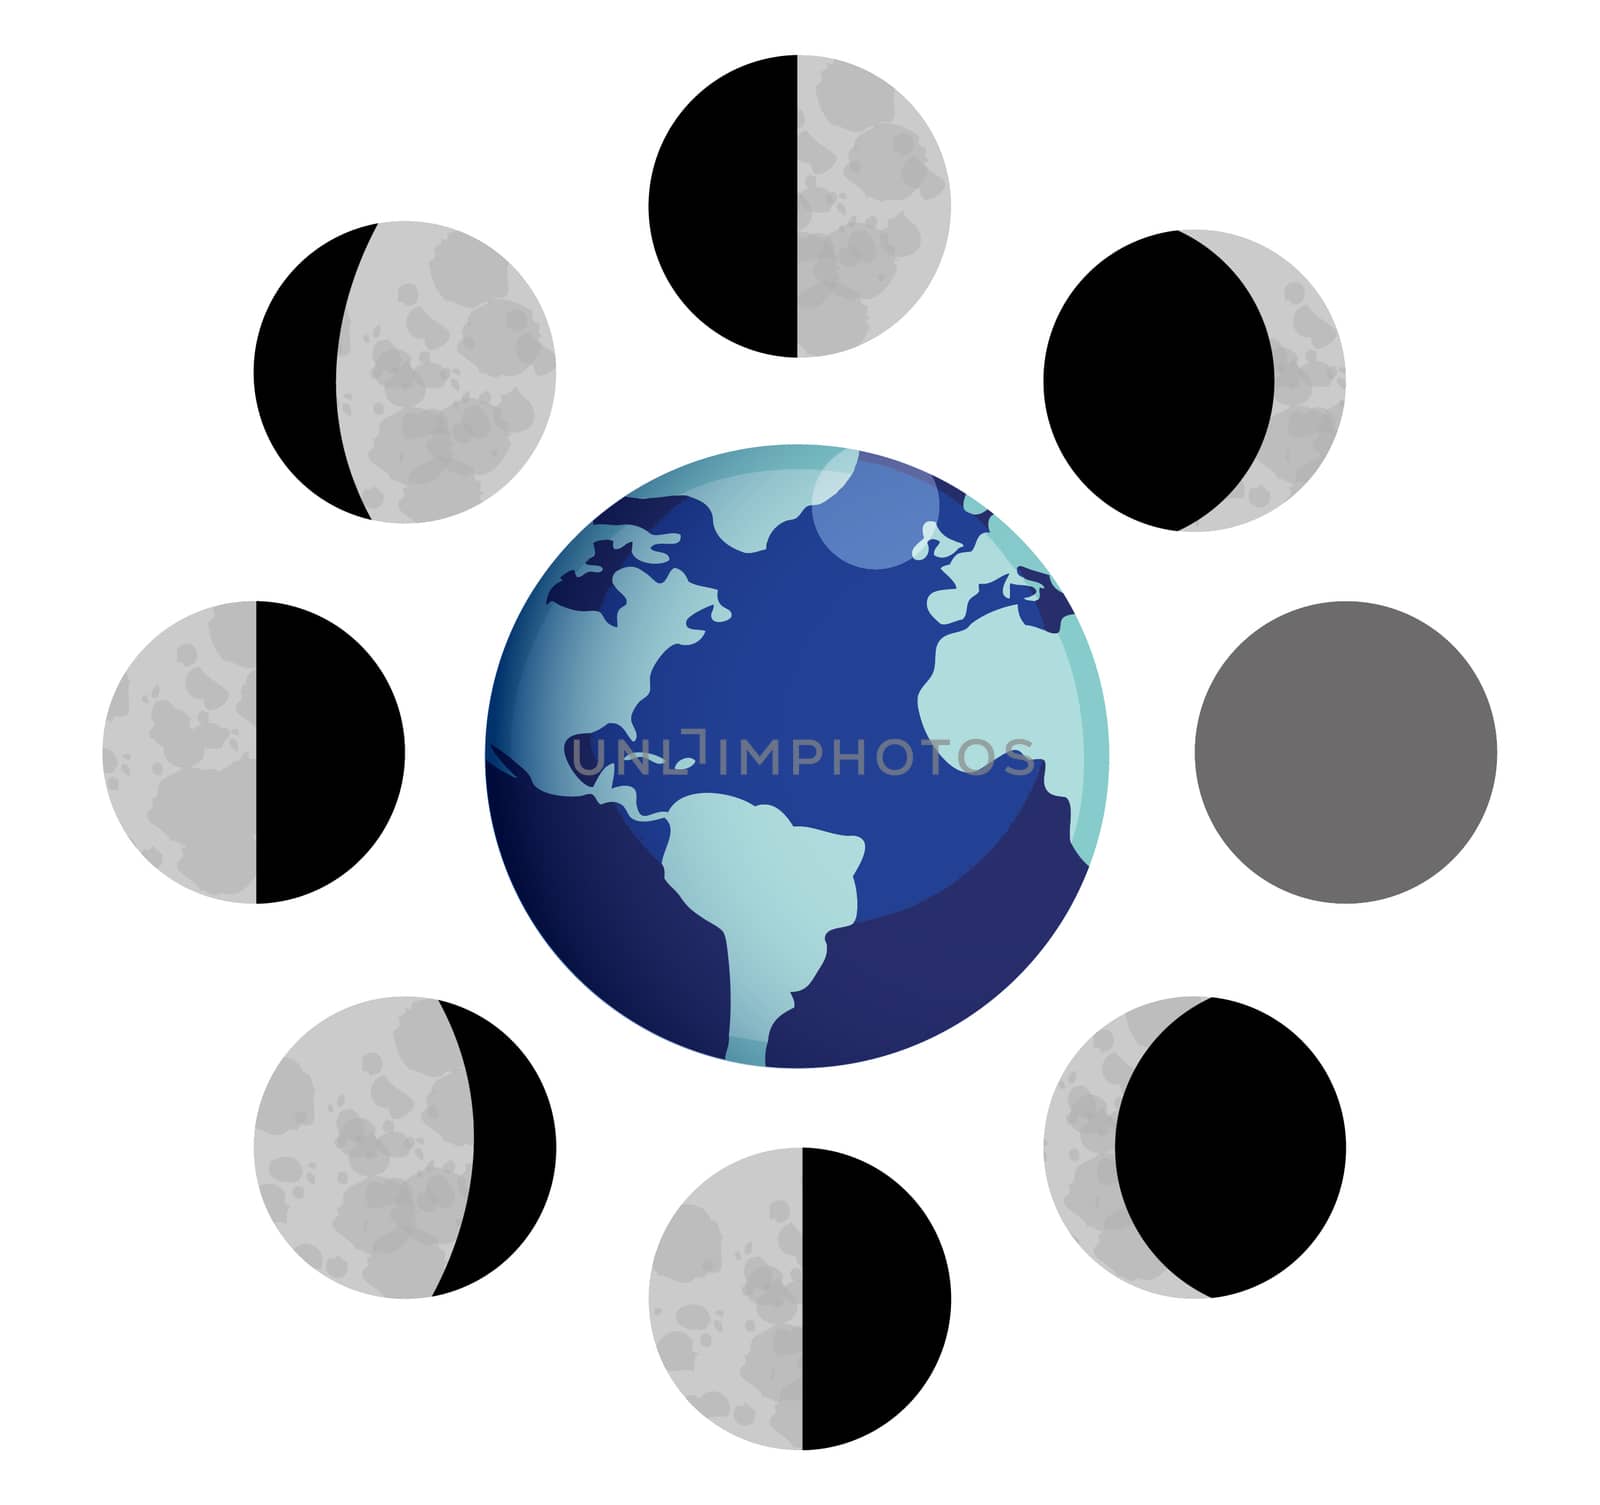 Moon phases illustration design by alexmillos